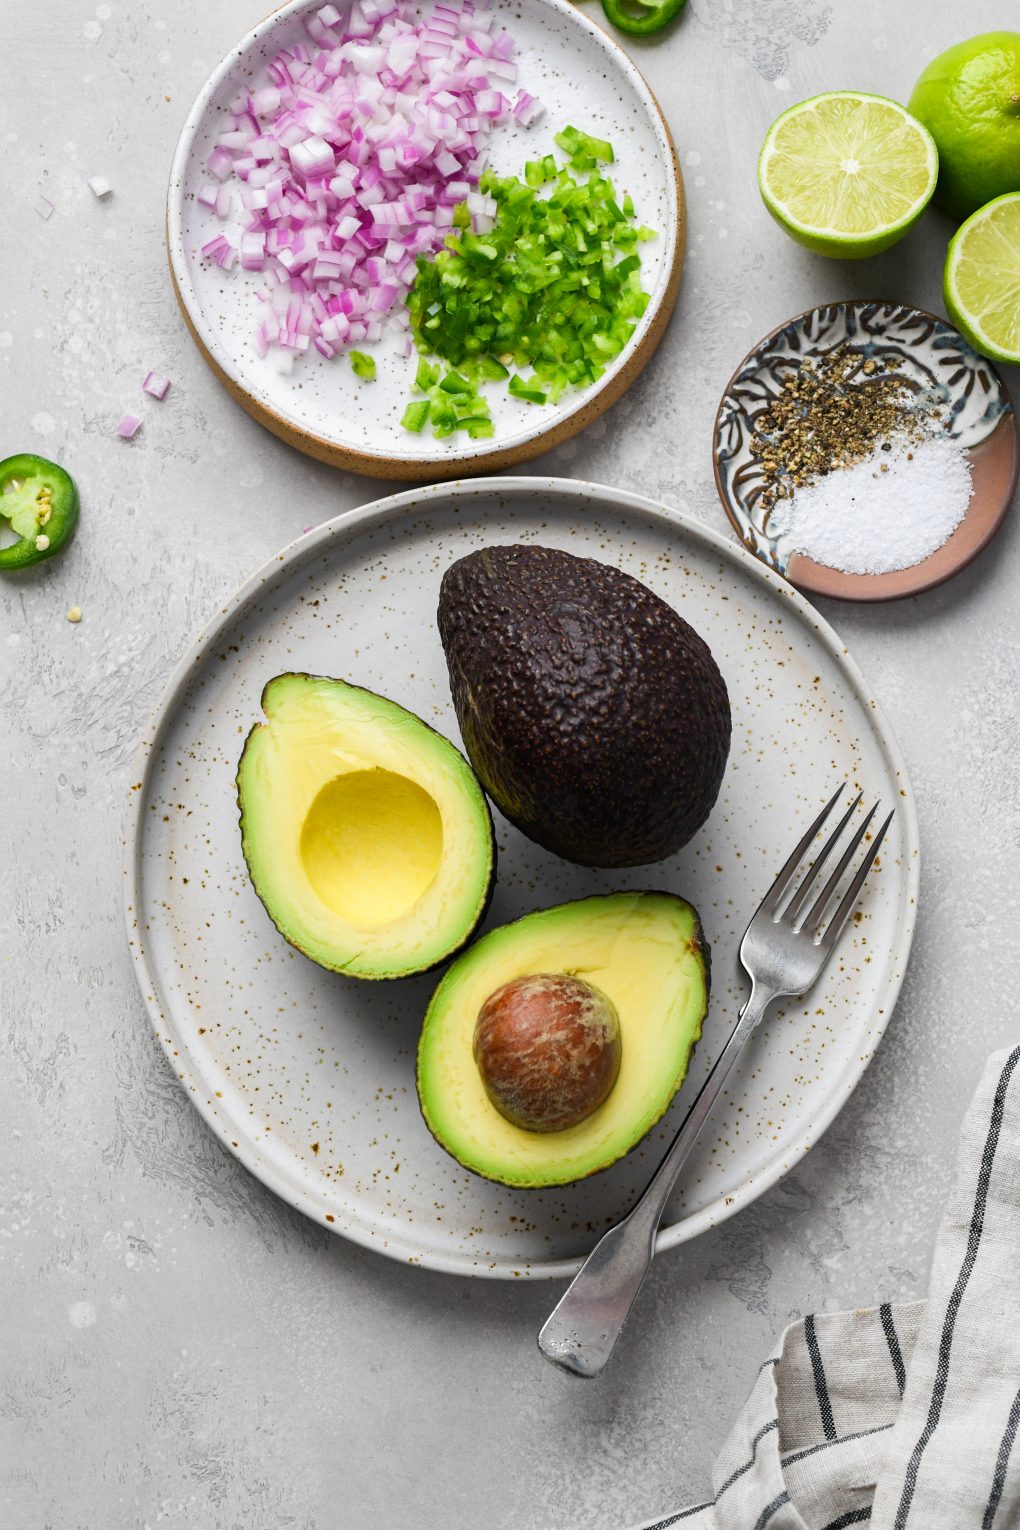 Image of ingredients used to make easy guacamole recipe. A plate with 2 avocados - one cut in half, a smaller plate with finely diced red onion, jalapeno, some cut limes, and a smaller plate with salt and pepper. 